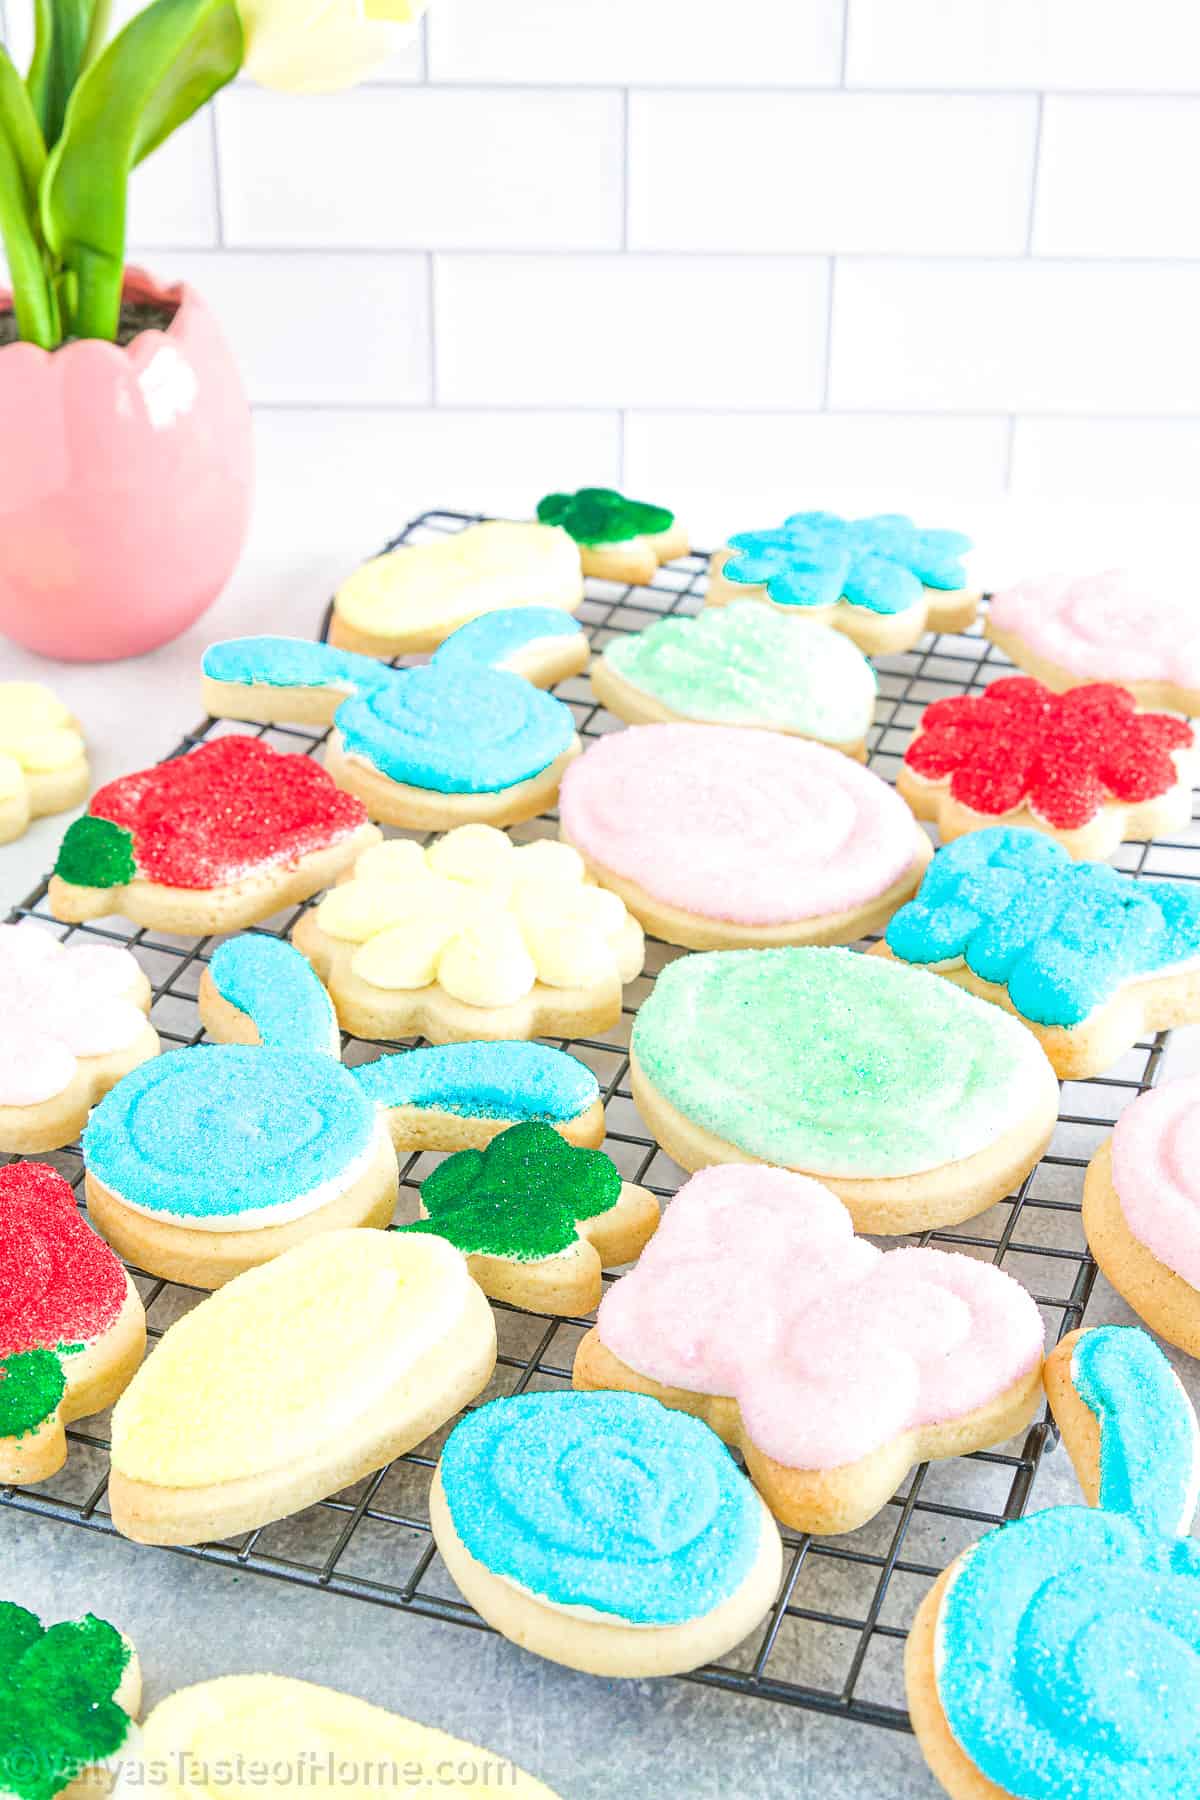 The recipe involves a simple sugar cookie dough, cut into shapes using a cookie cutter, baked to perfection, and then topped with a generous layer of sweet, creamy frosting. 